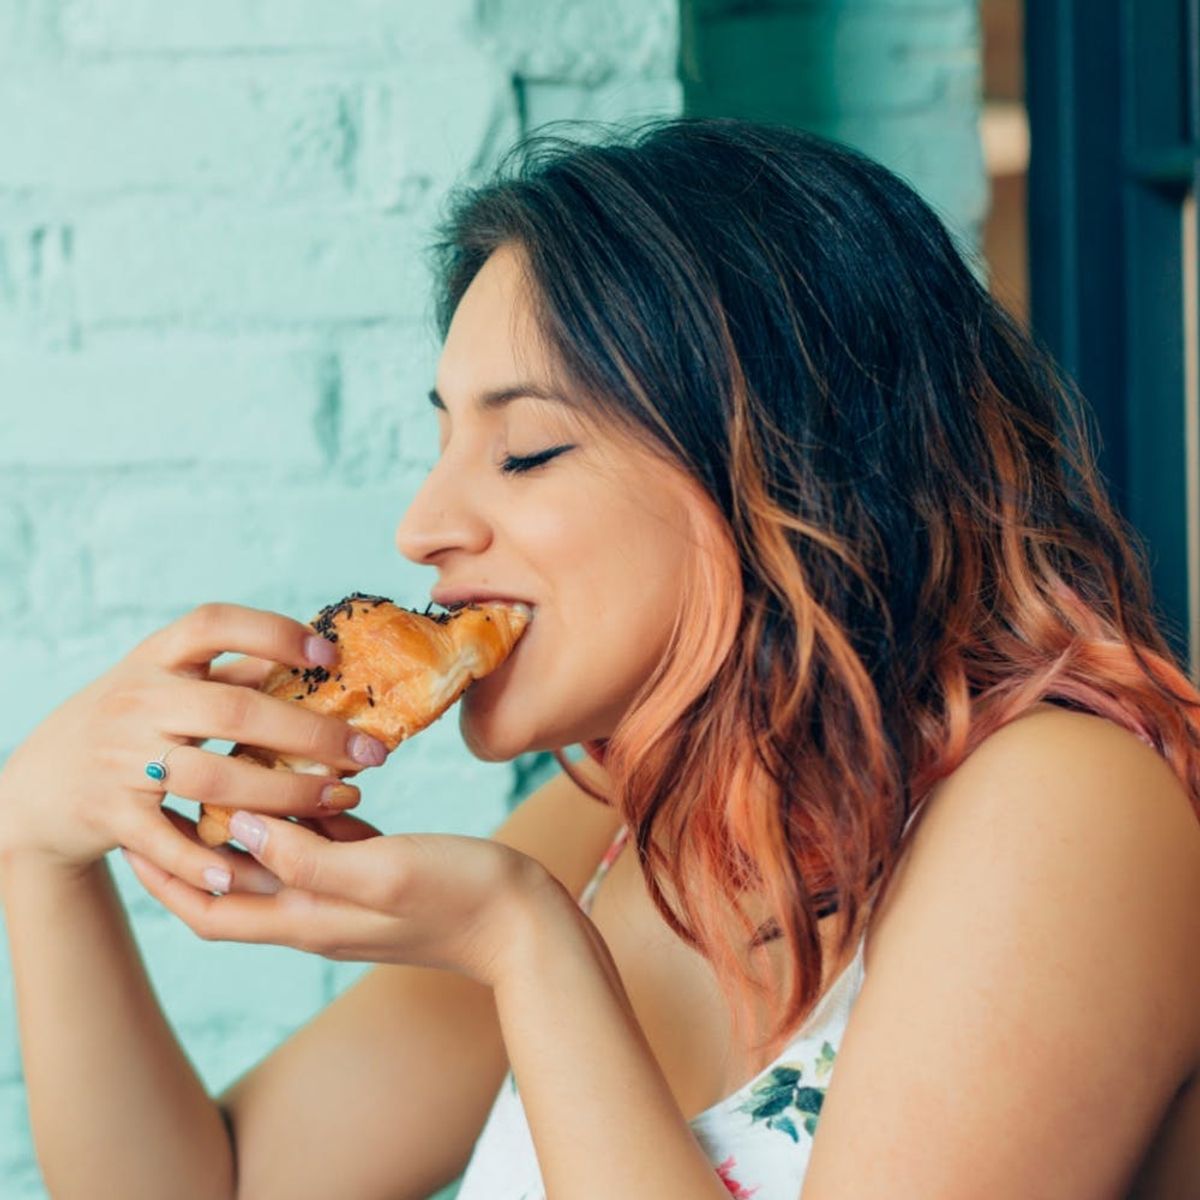 4 Things You Should Never Do on an Empty Stomach